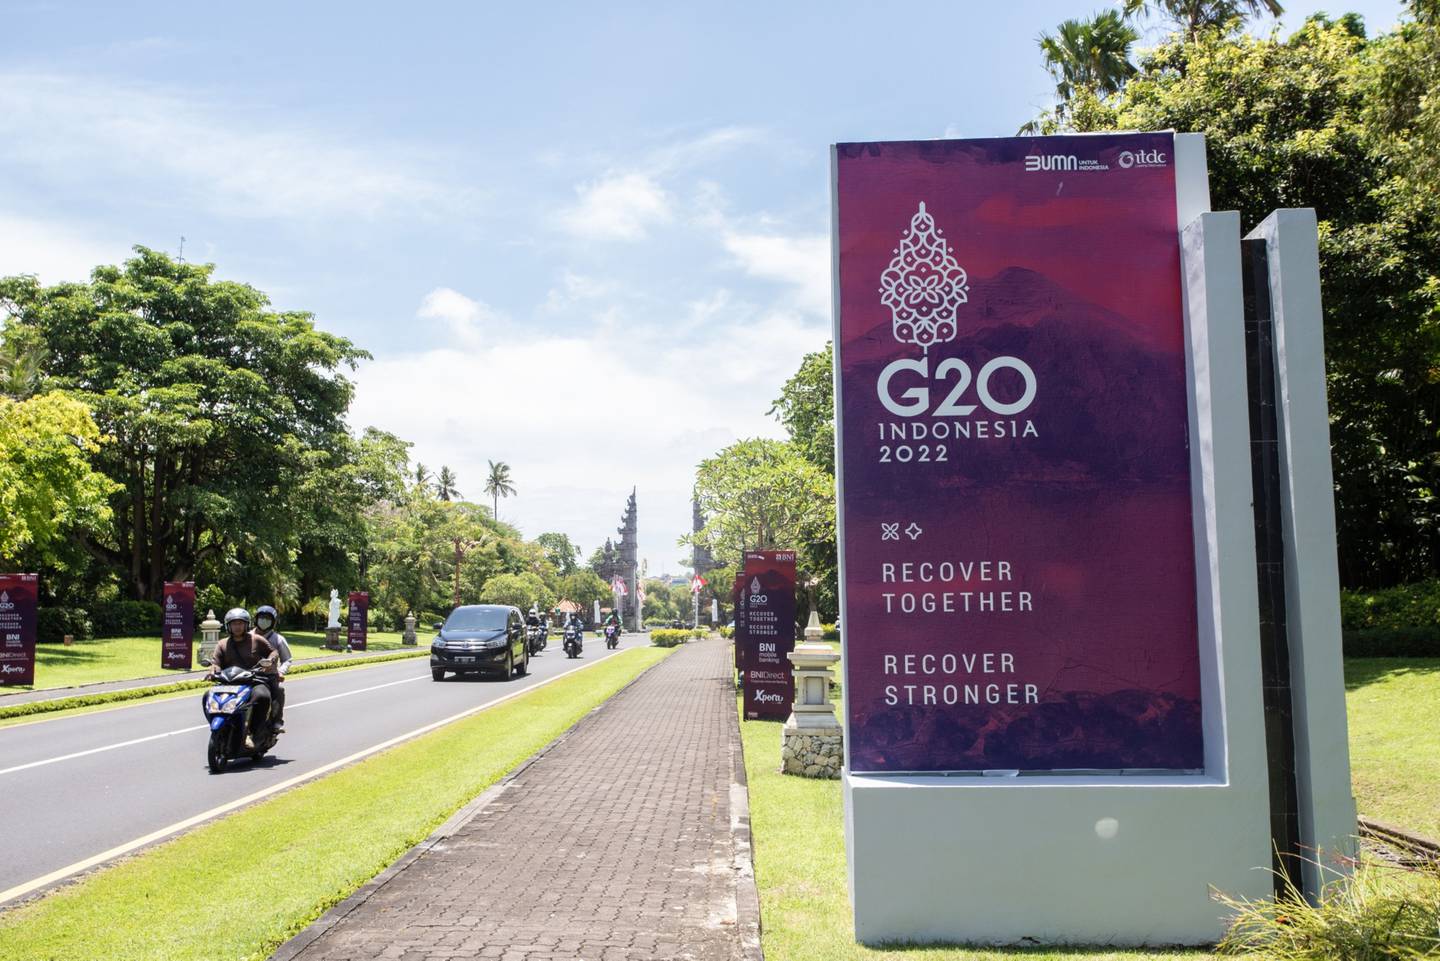 Banners for the G20 Bali Summit in Nusa Dua. Bloomberg